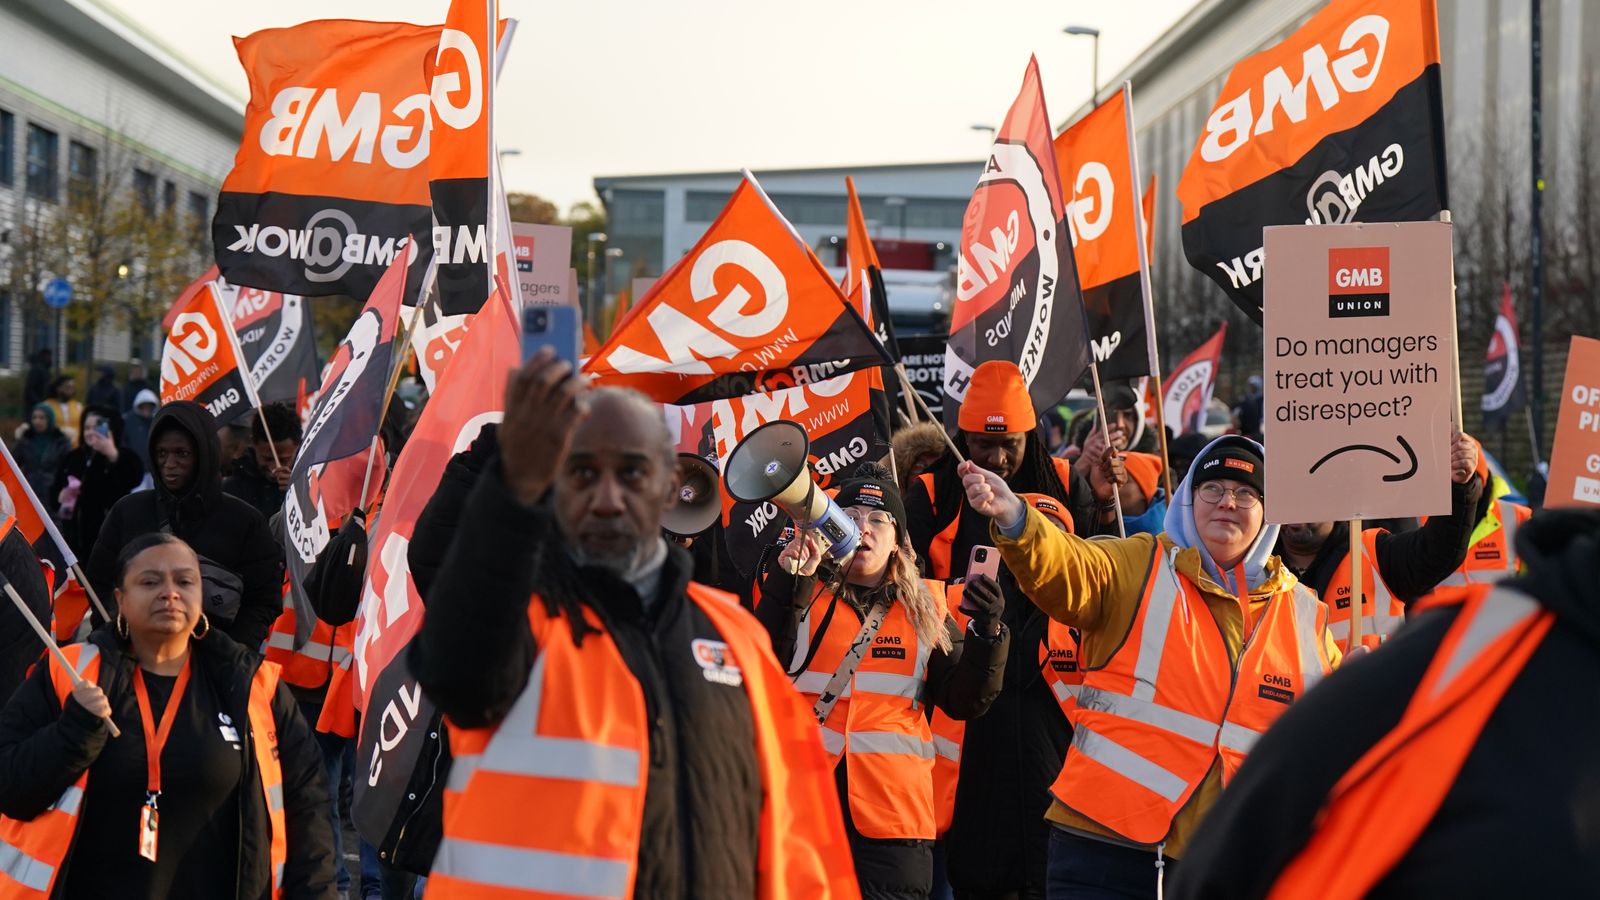 Amazon Black Friday strike: Workers in Coventry to walk out as part of international action against retailer